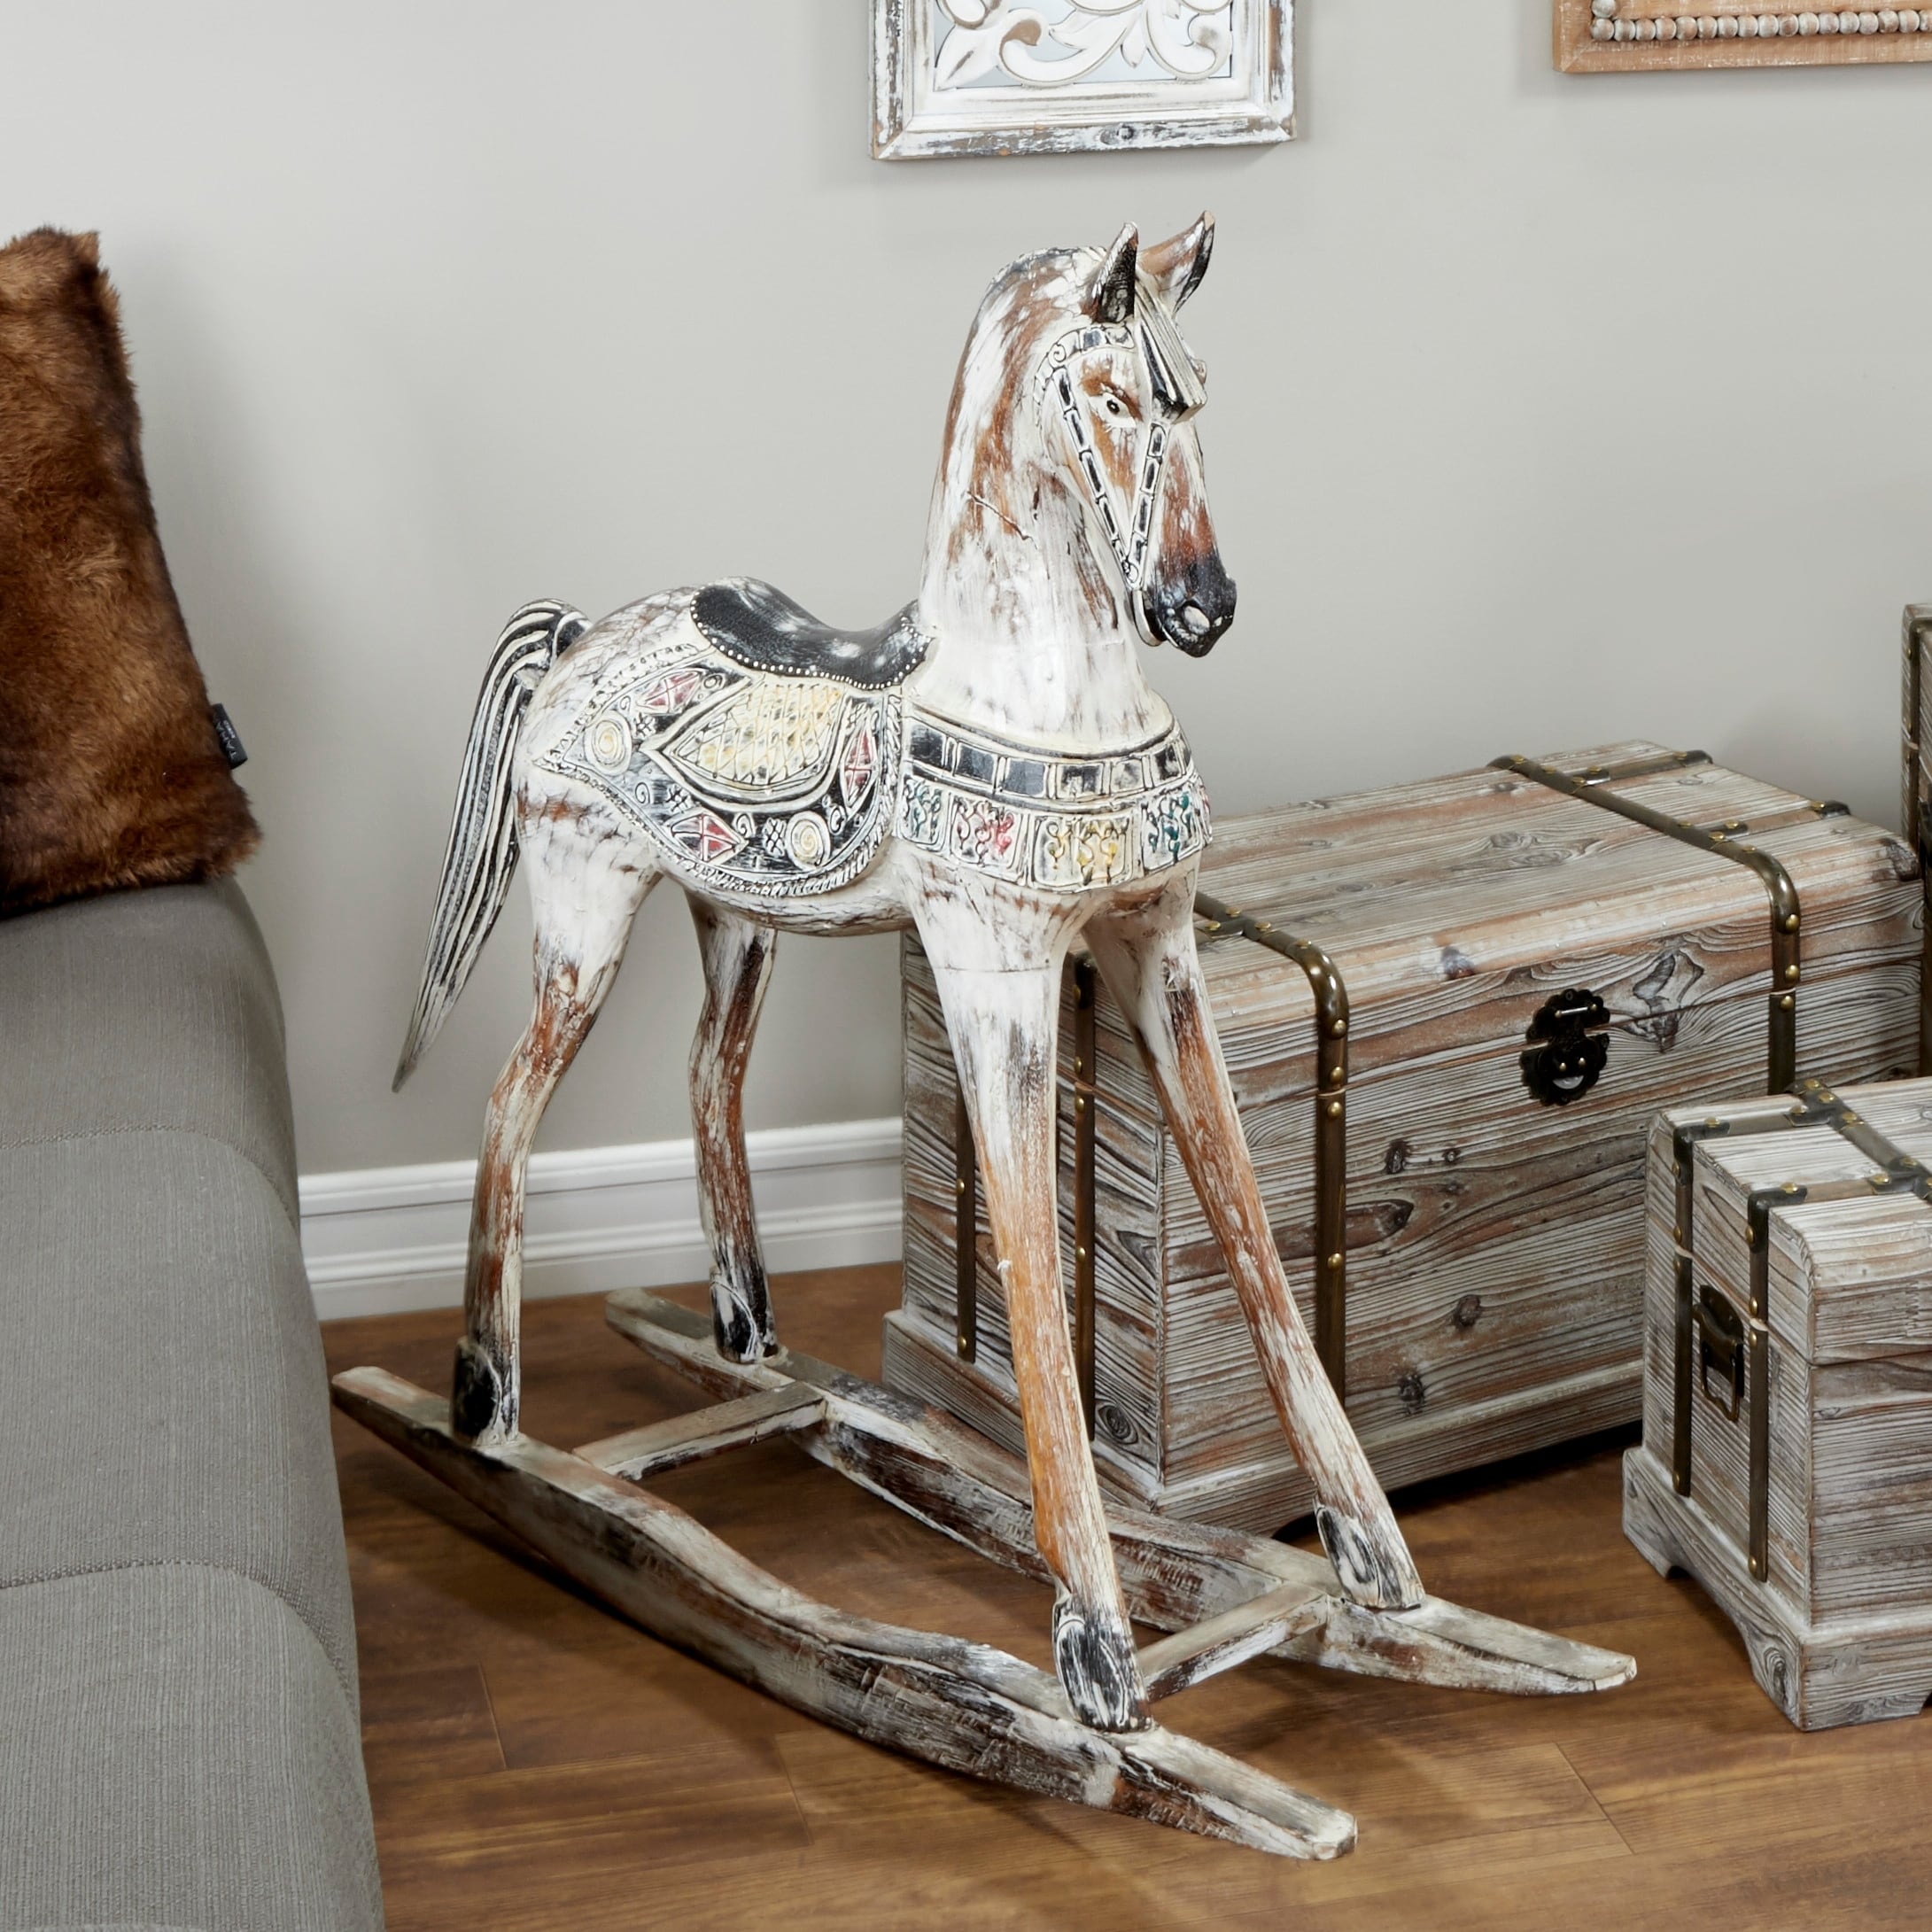 personalized wooden rocking horse